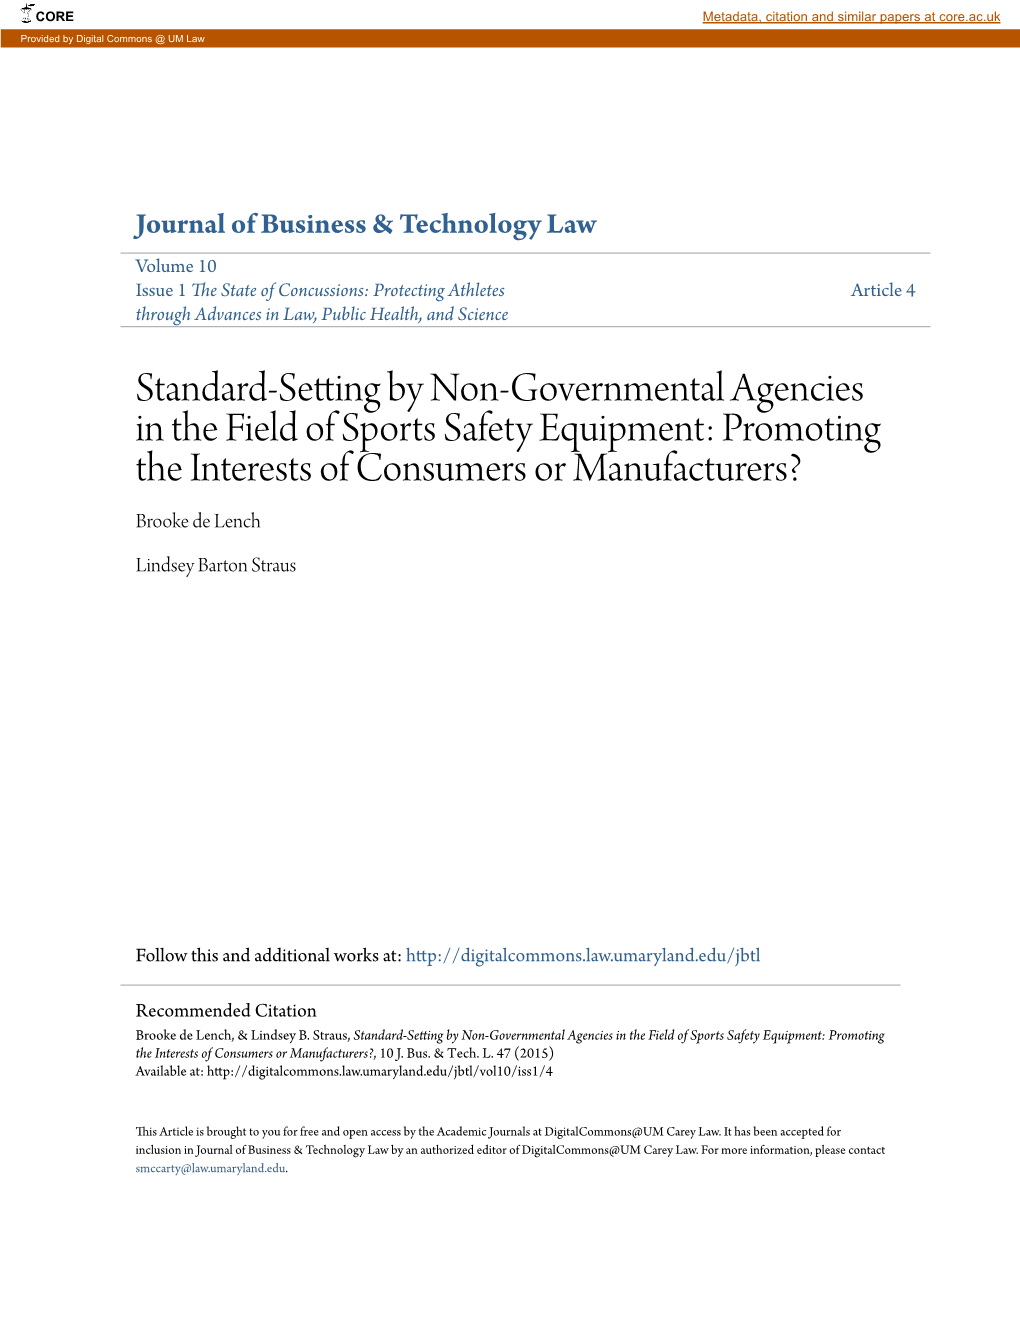 Standard-Setting by Non-Governmental Agencies in the Field of Sports Safety Equipment: Promoting the Interests of Consumers Or Manufacturers? Brooke De Lench